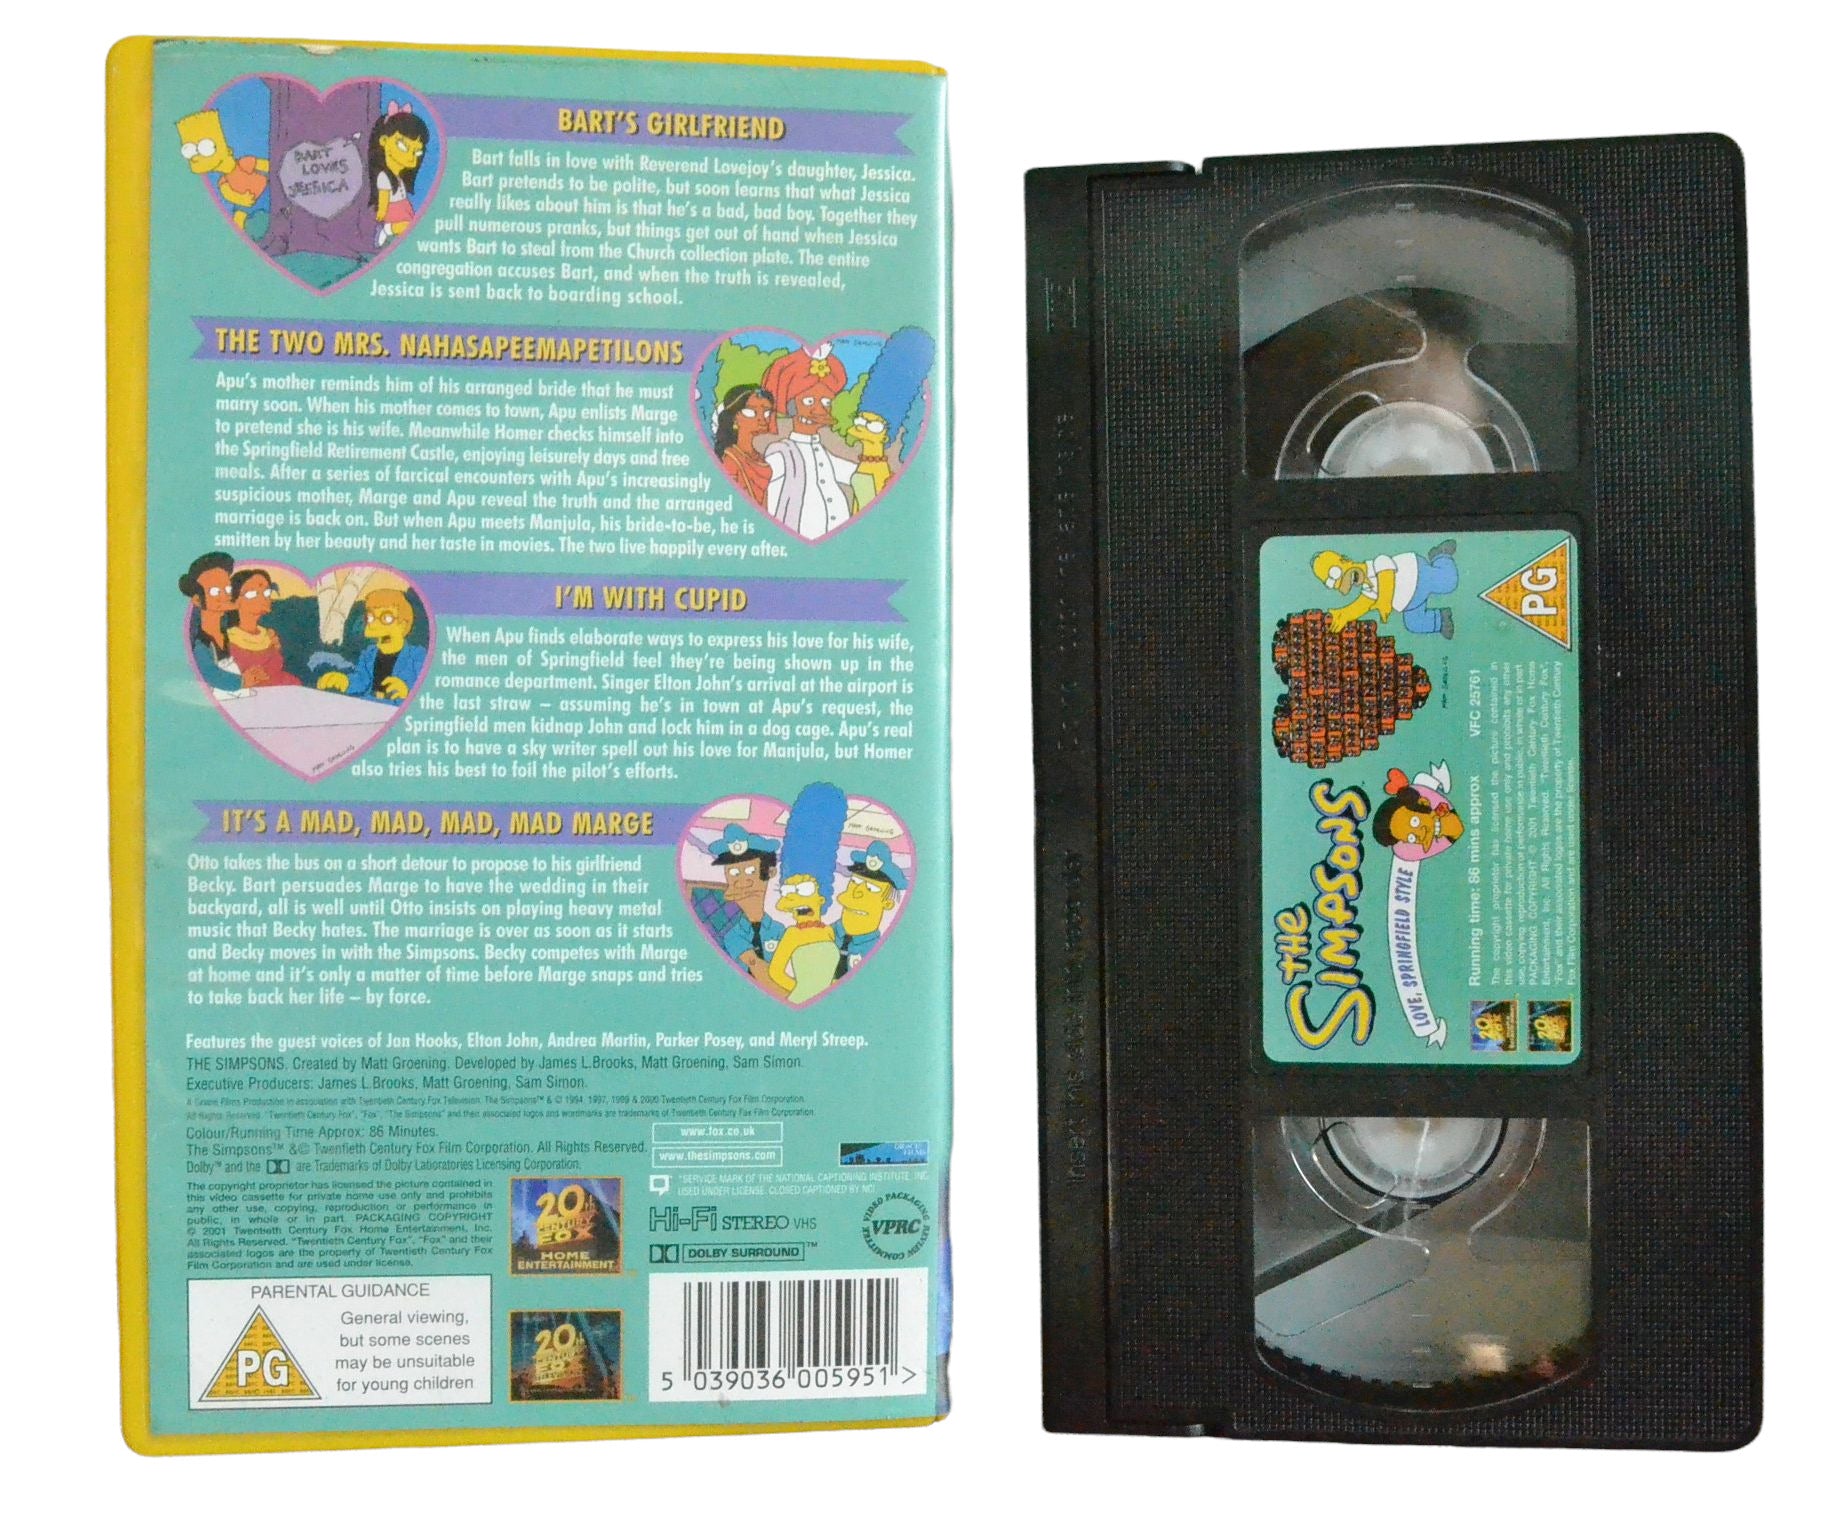 The Simpsons (Love, Springfield Style) - 20th Century Fox Home Entertainment - Children's - Pal VHS-